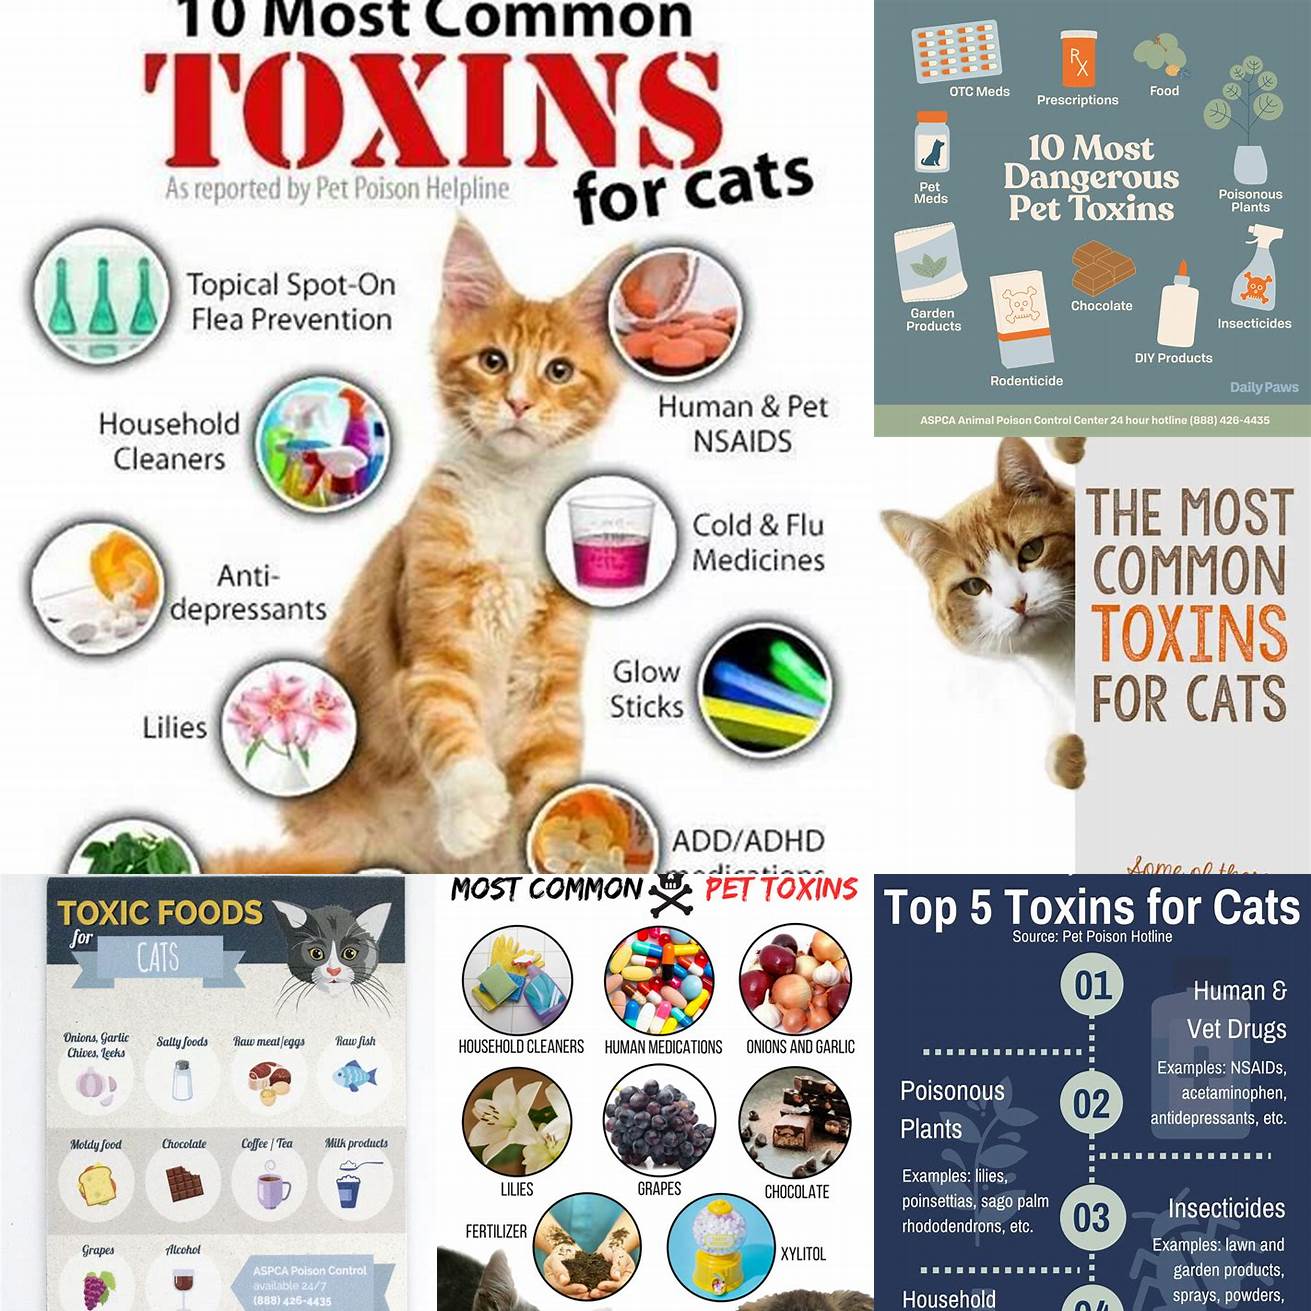 Keep Toxins Out of Reach